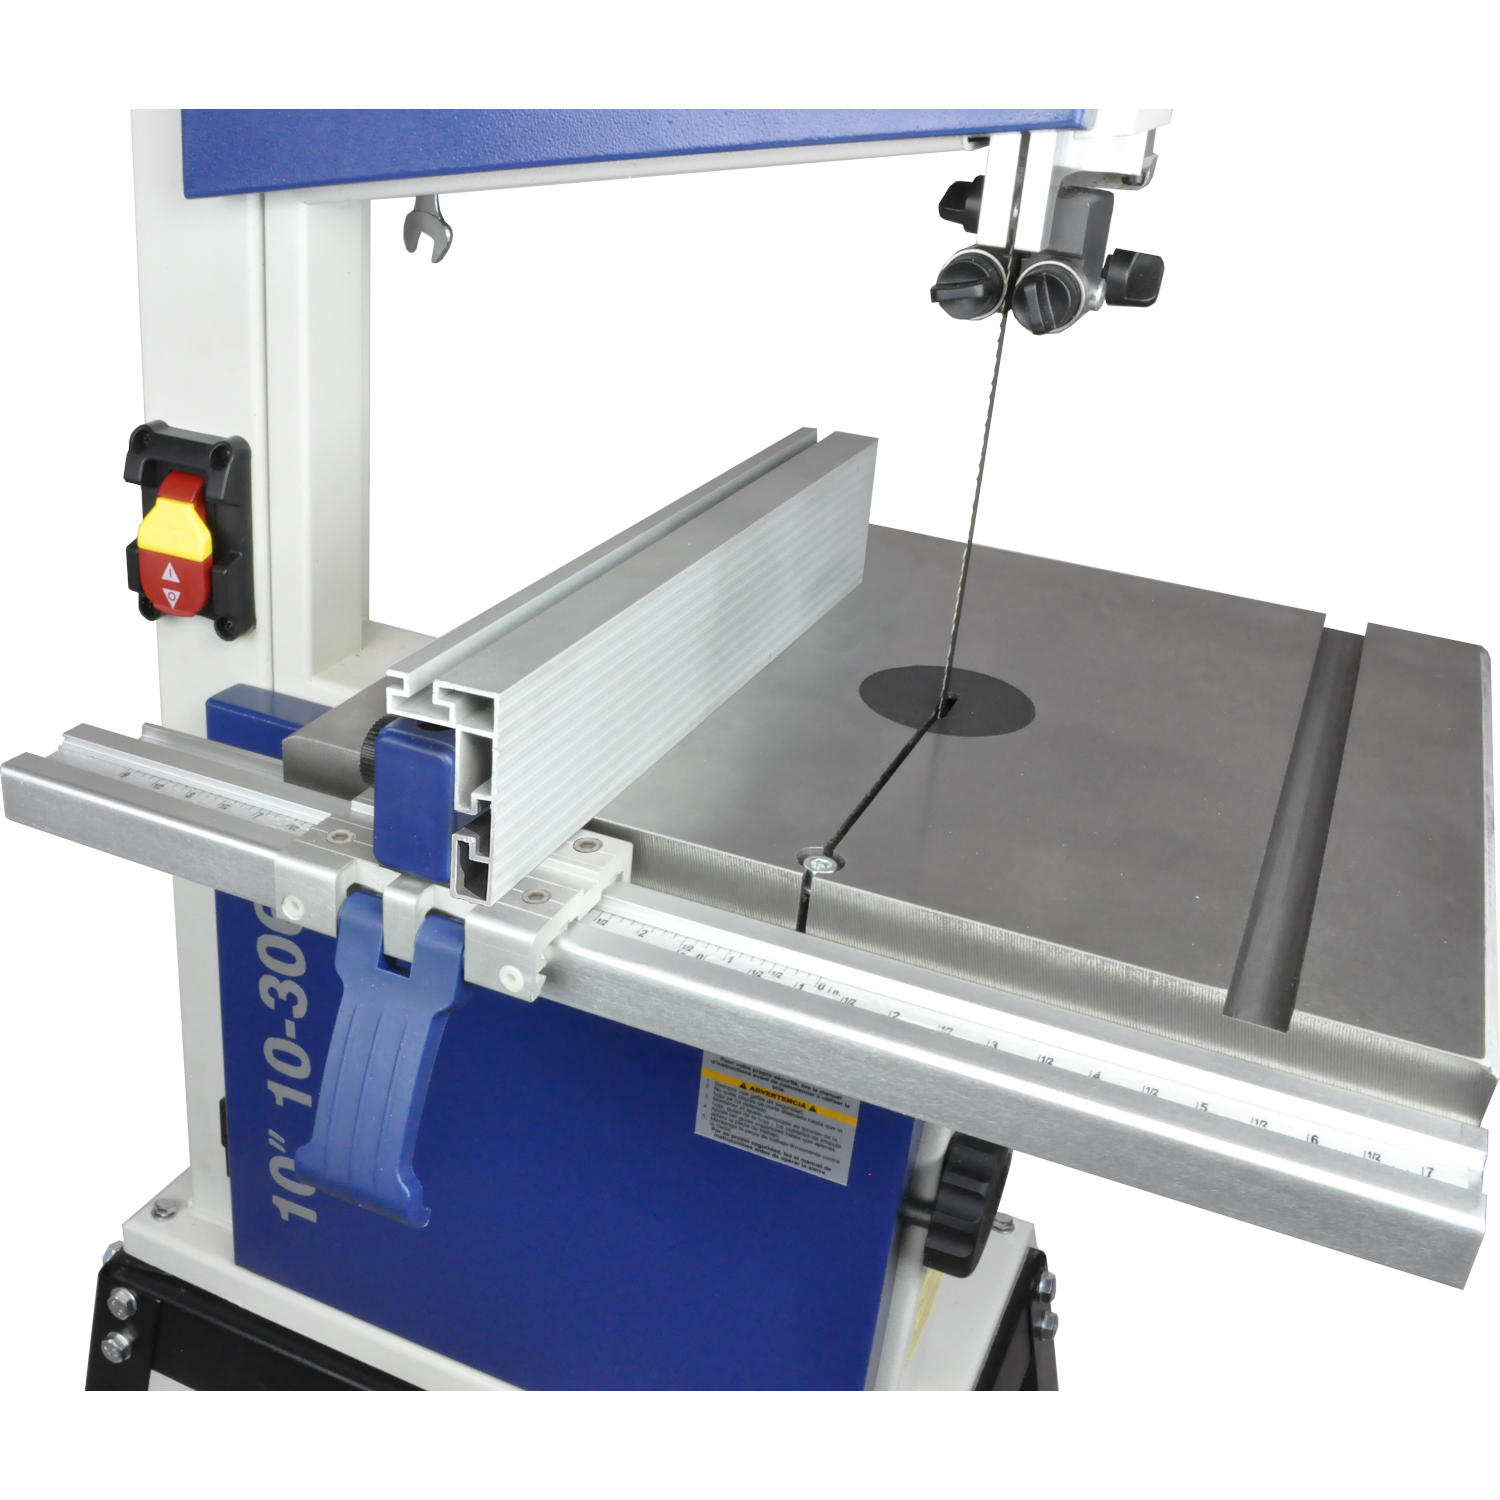 Rikon Deluxe Rip Fence System for 10-305 Bandsaw